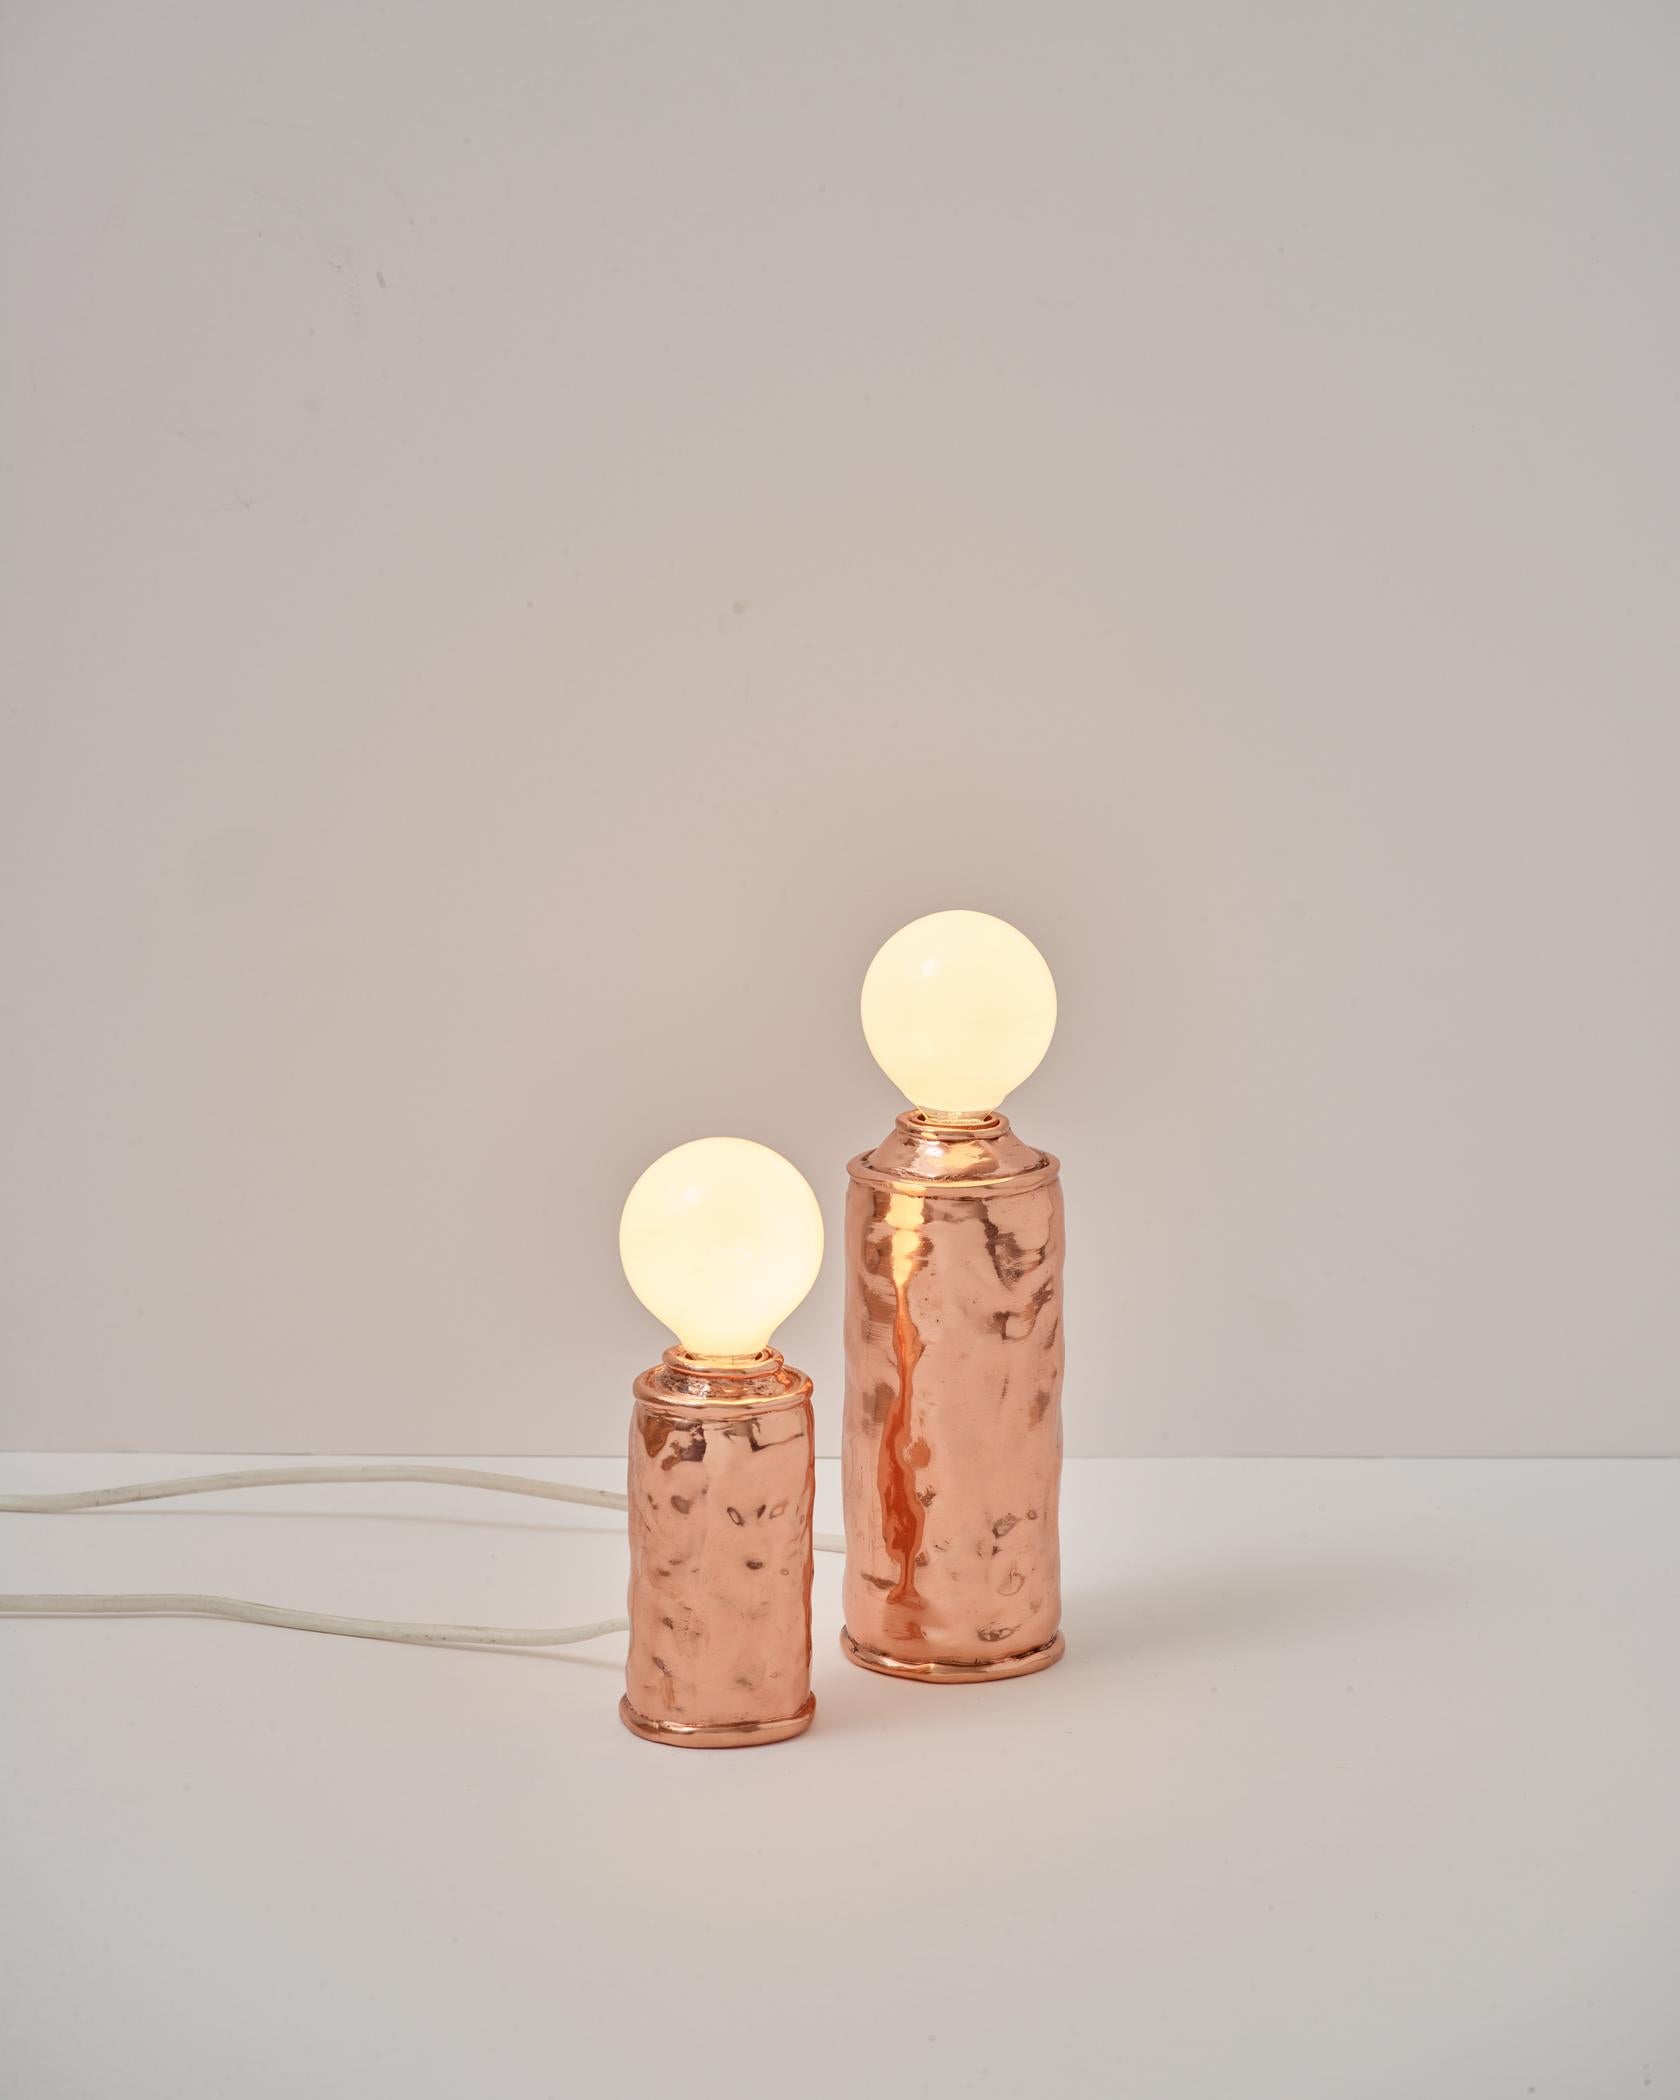 Niccoló Spirito
Table lamp 
Bombolamp lighting collection

Each piece is accompanied by a Certificate of Authenticity signed by the author.

BOMBOLAMP is a series of table lamps made using exact copies of different types of spray paint cans.